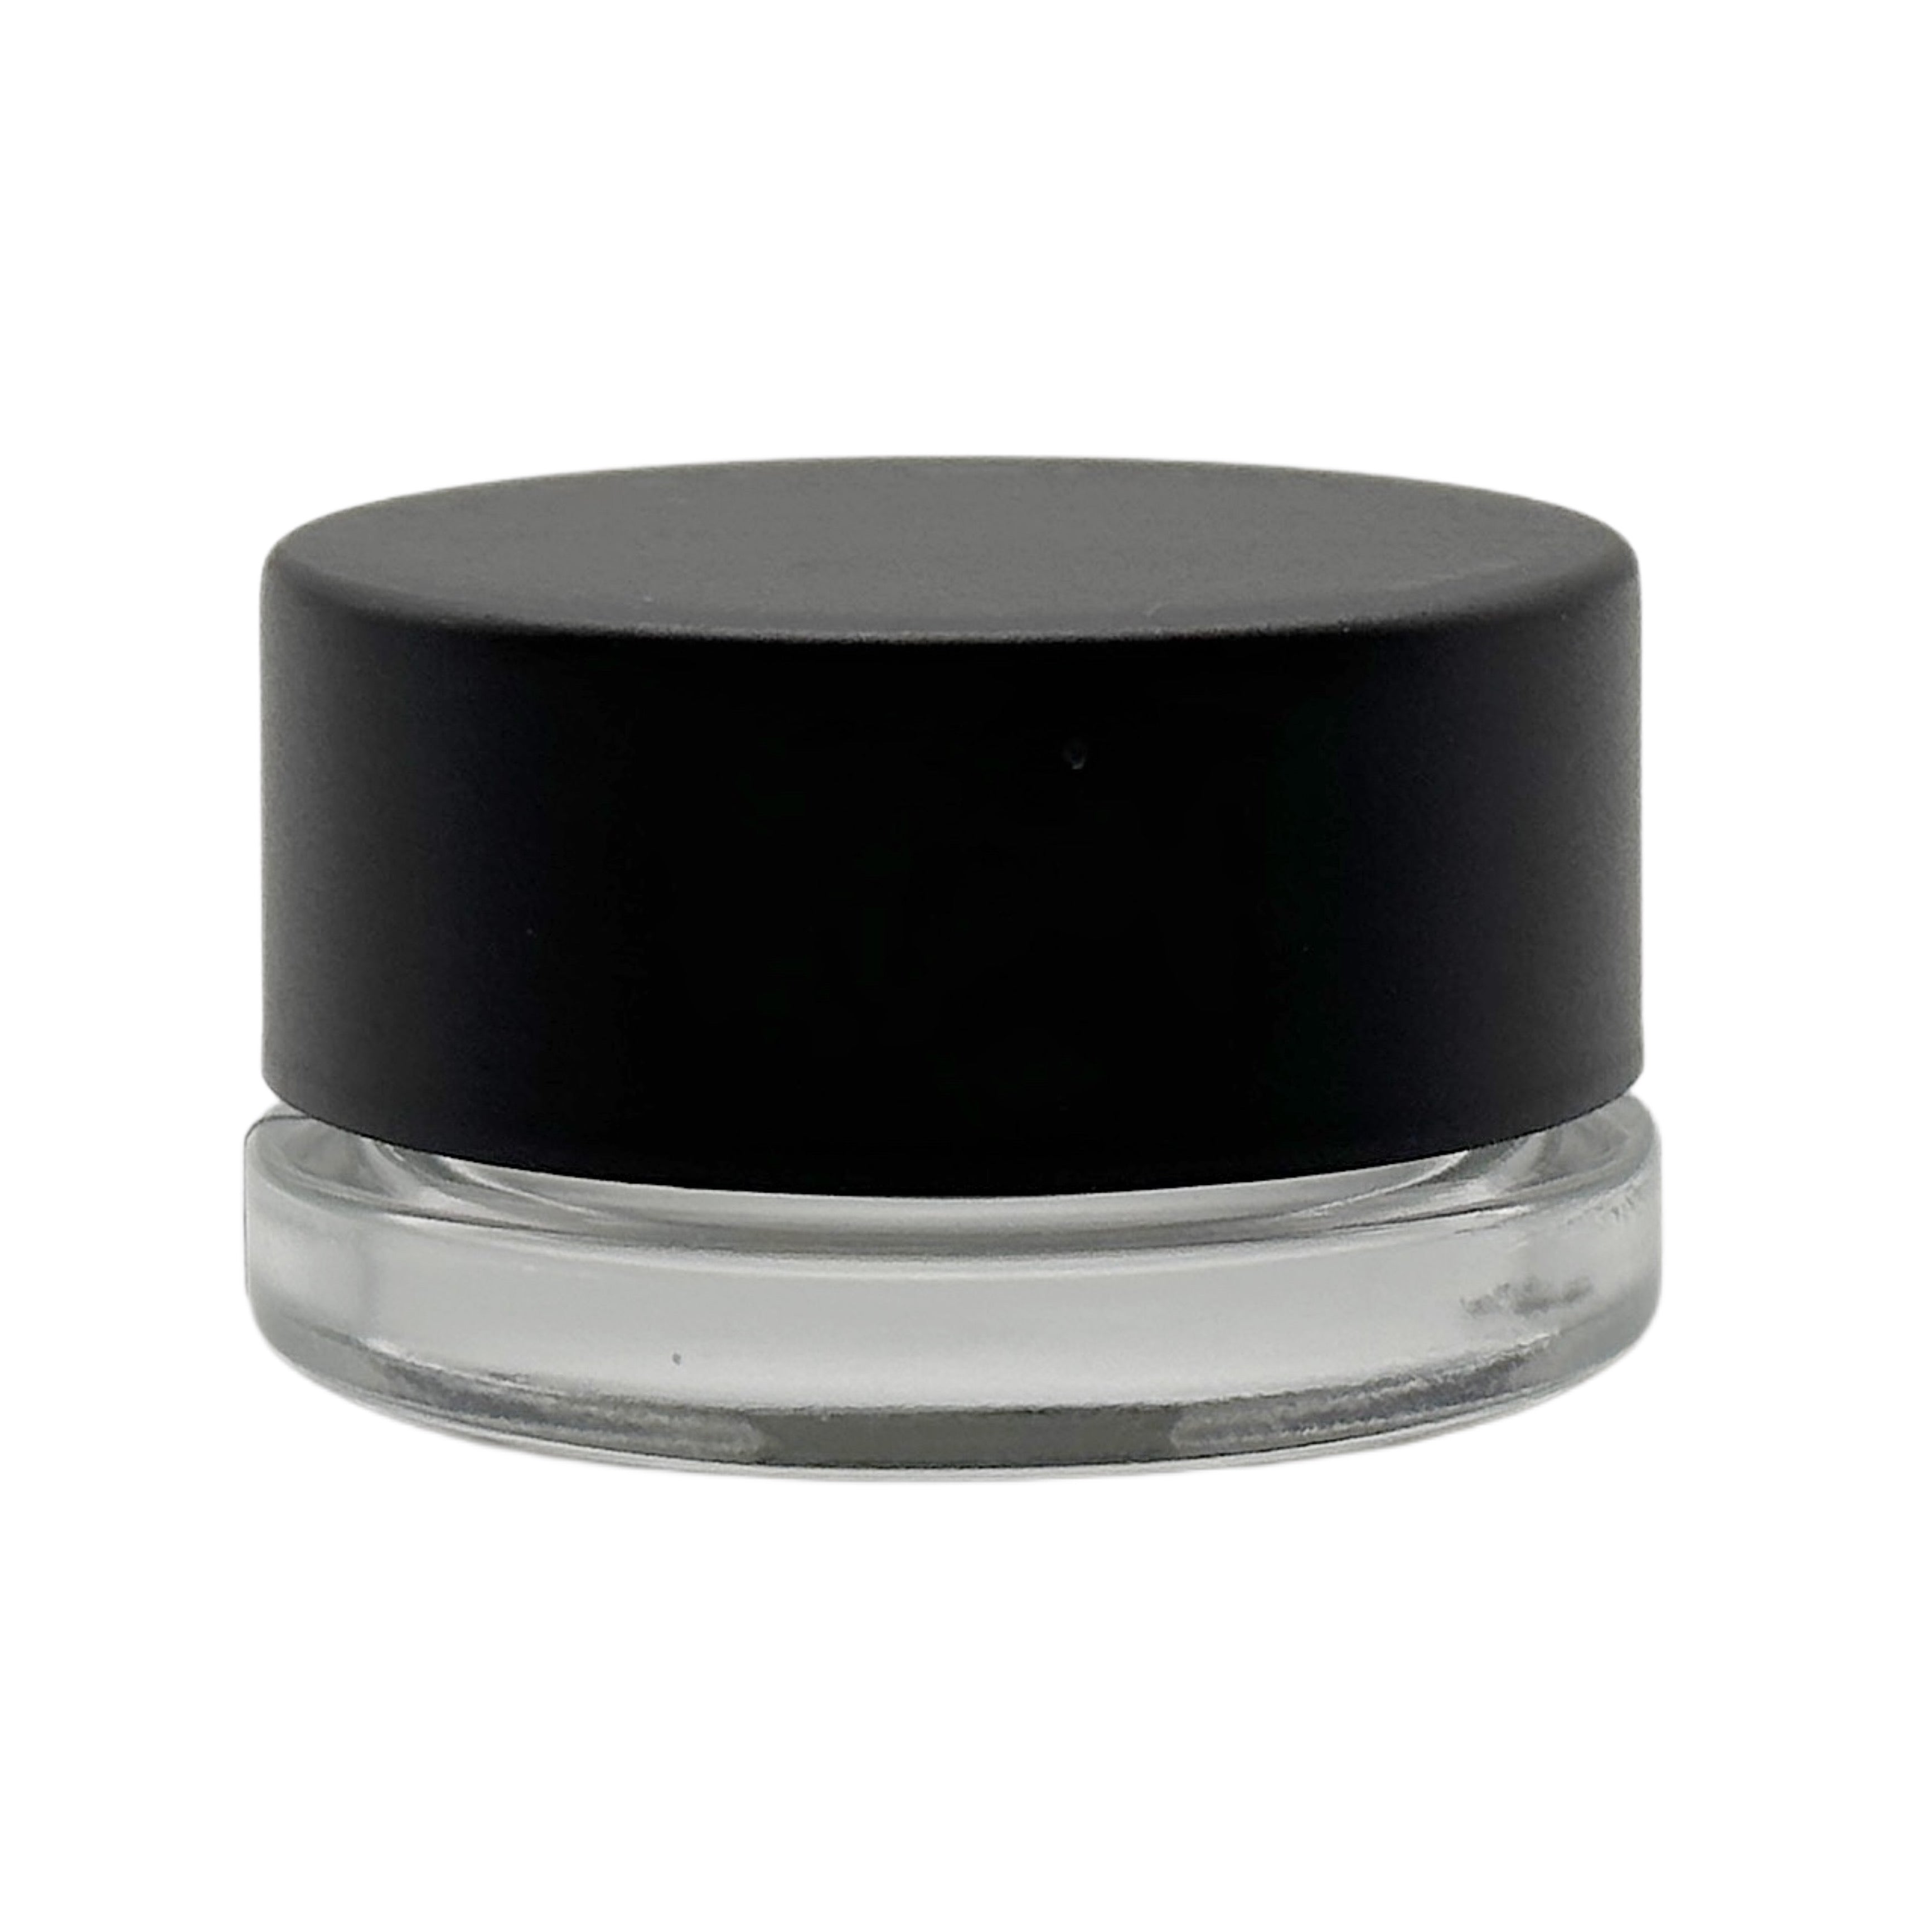 9ml Black Cap Clear Glass Container (320 qty)